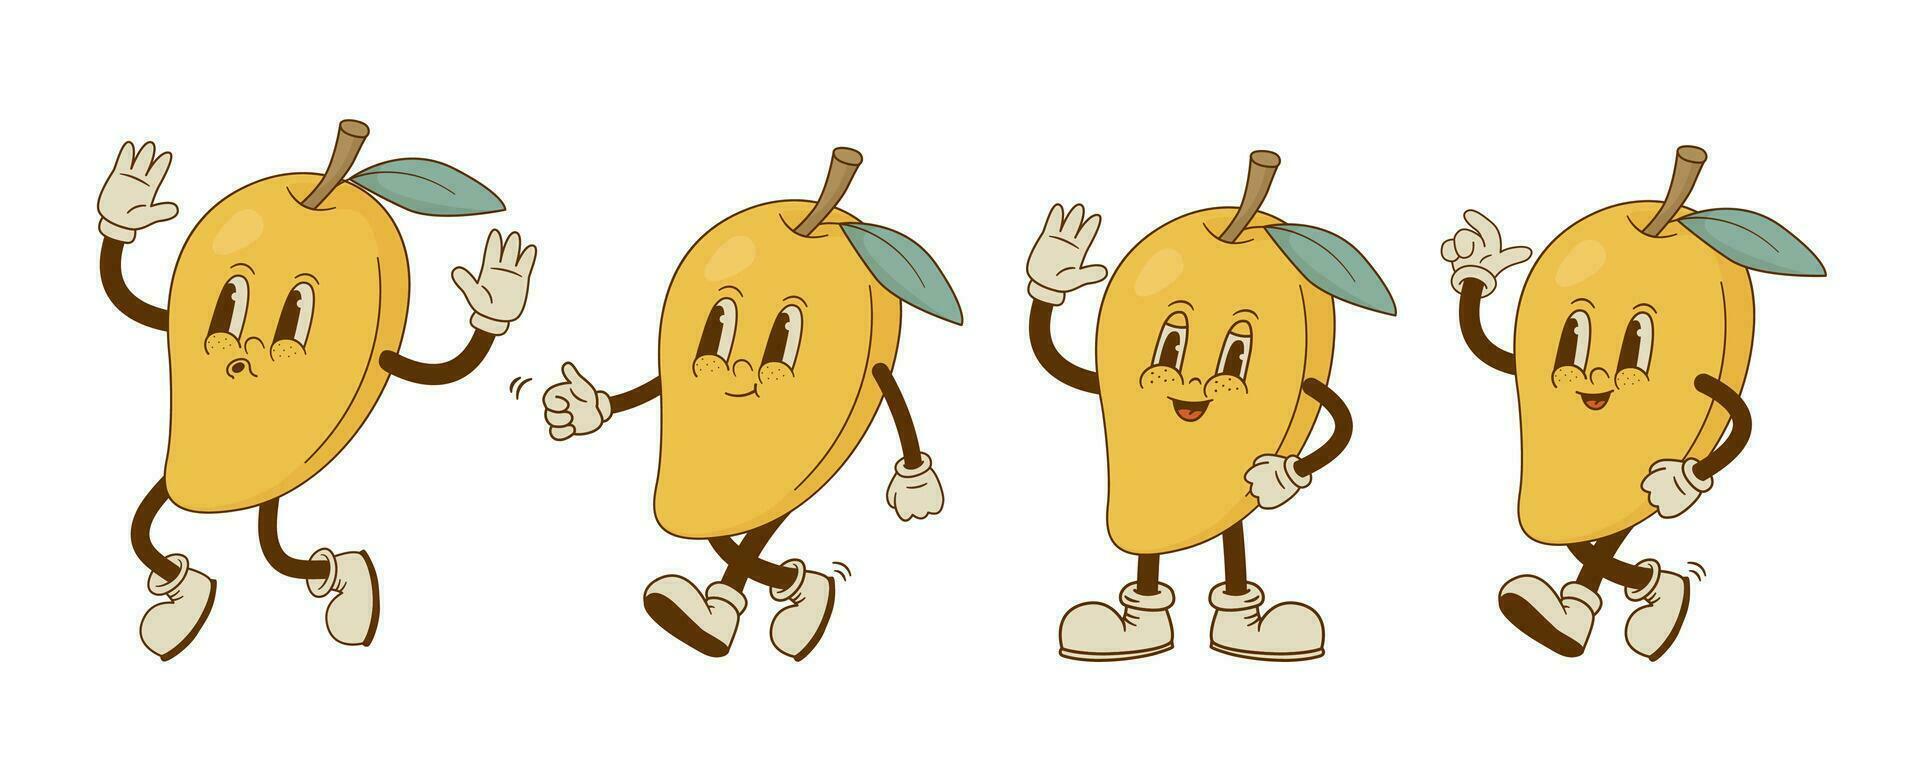 Set of funny retro cartoon mango characters in groovy style. Smiling fruit mascot in different poses and emotion. Vector illustration.